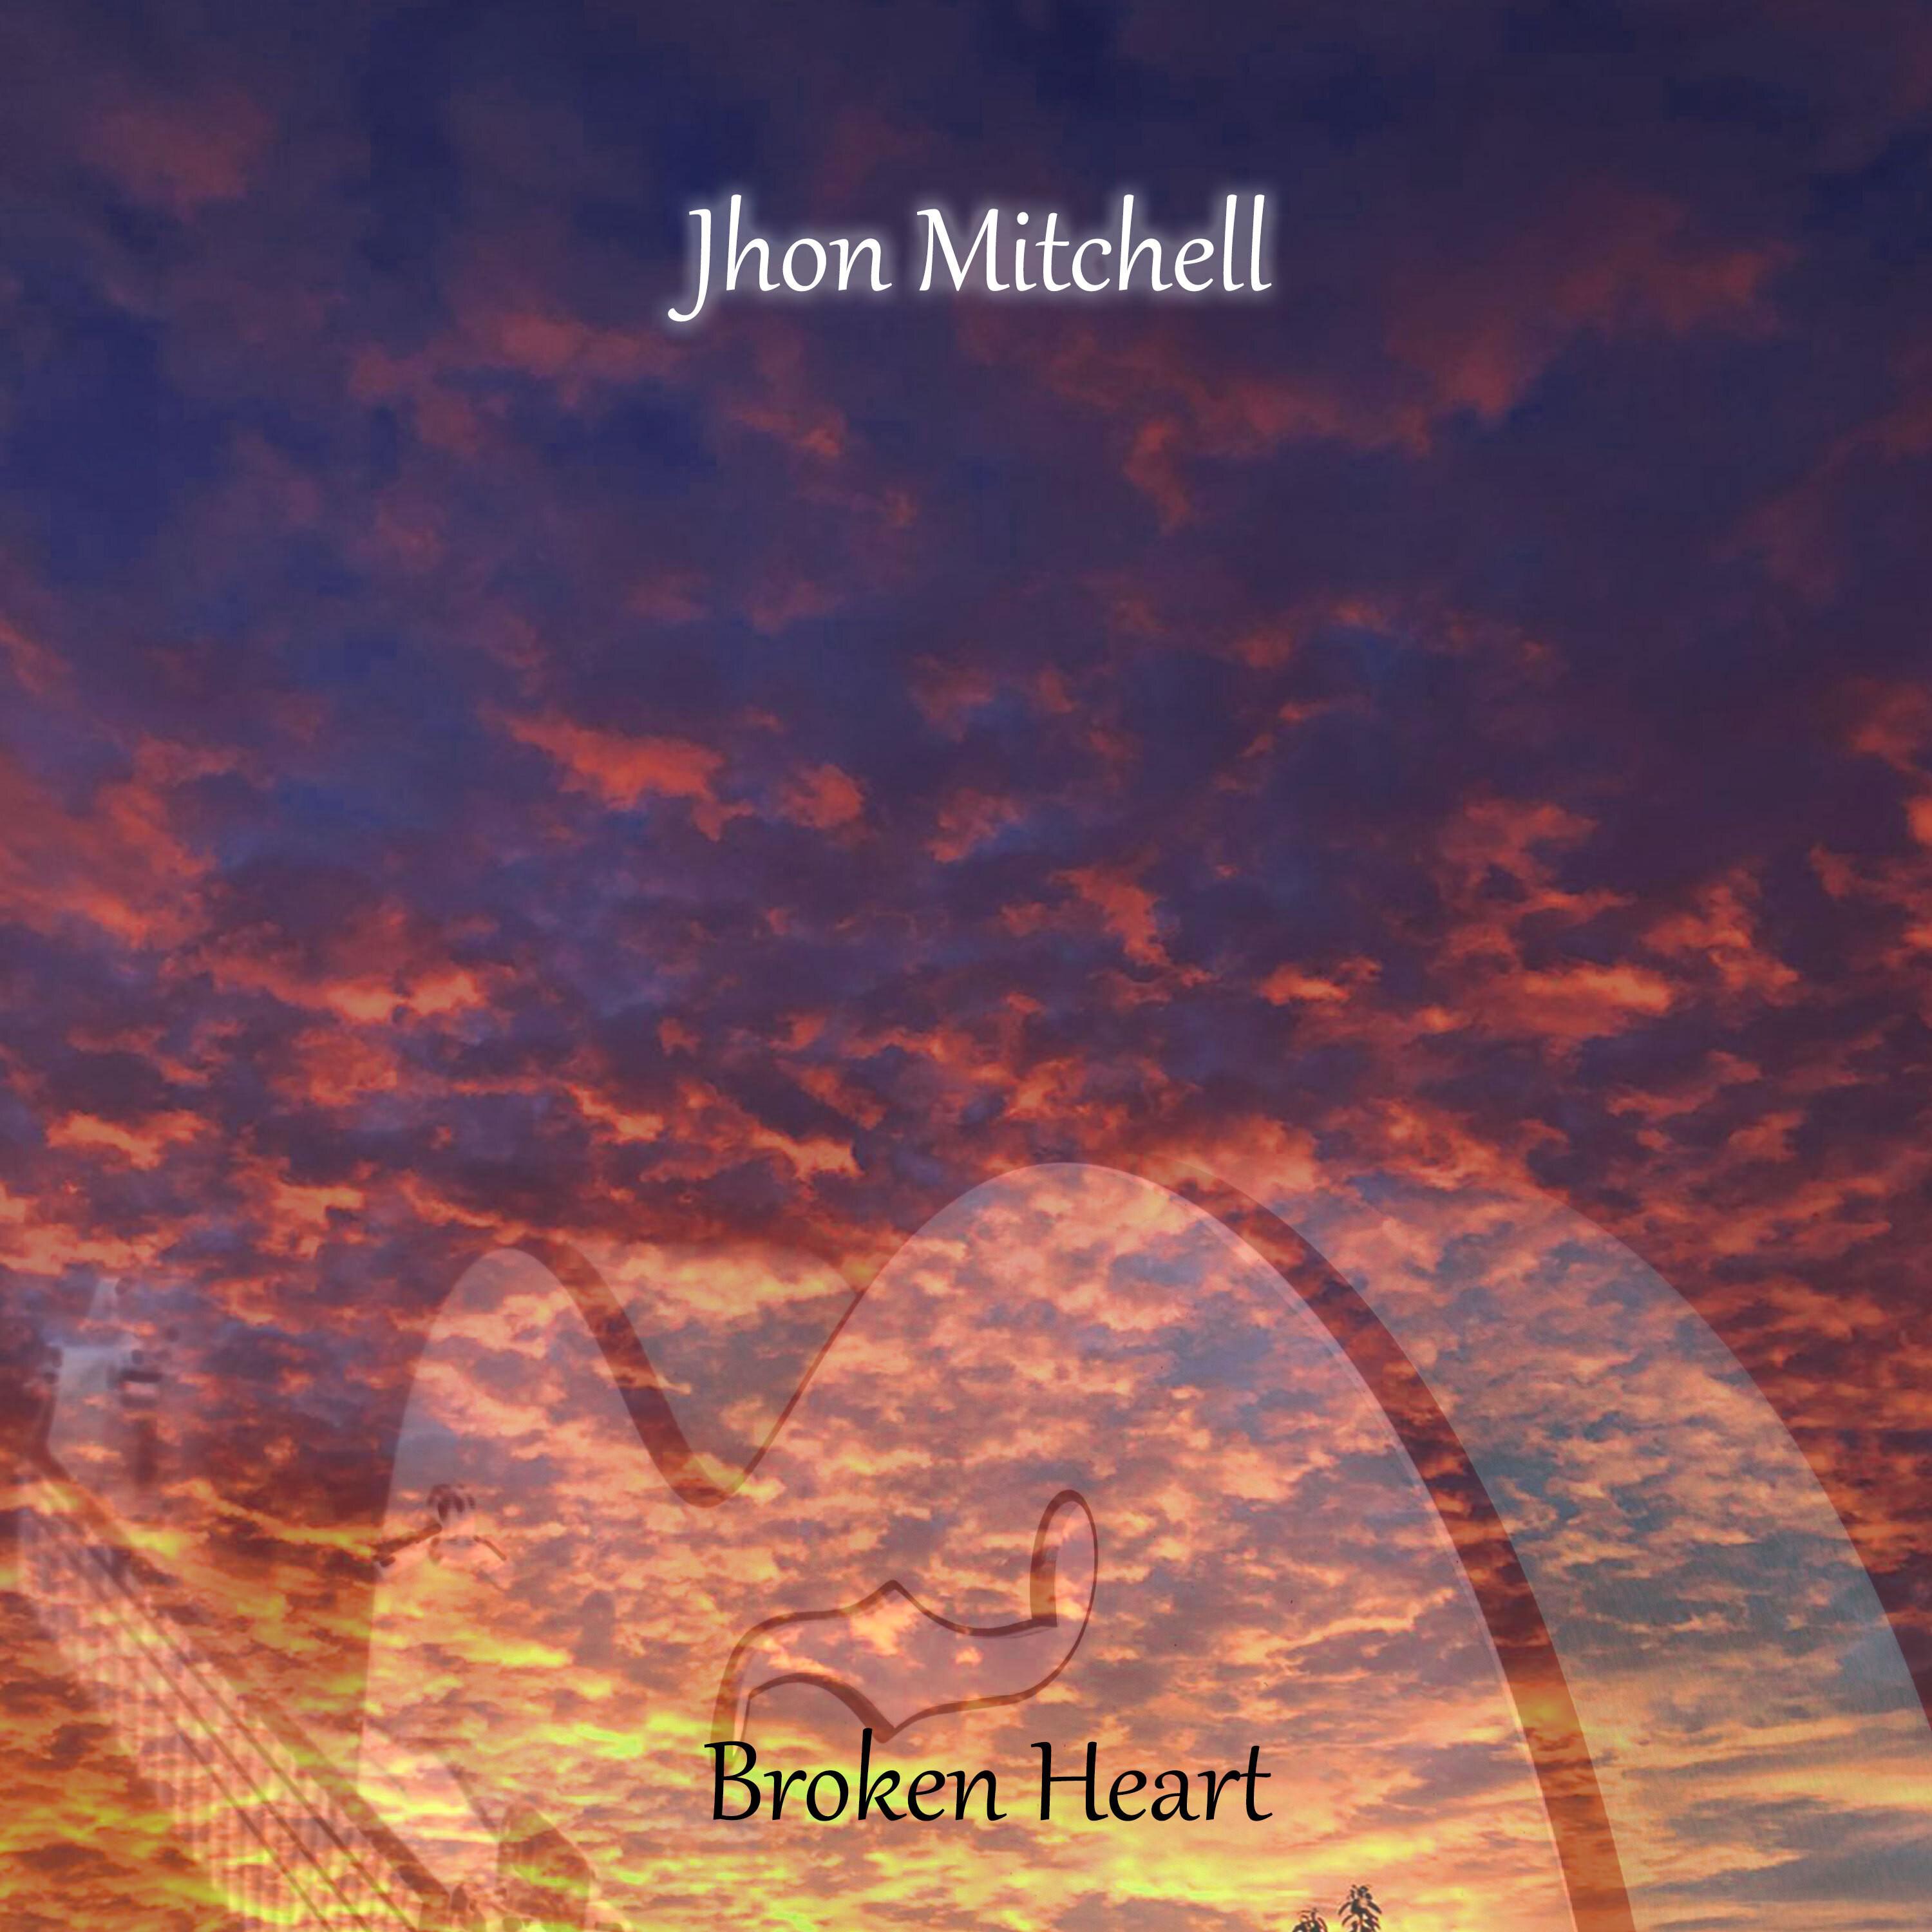 Jhon Mitchell - In the Back of You